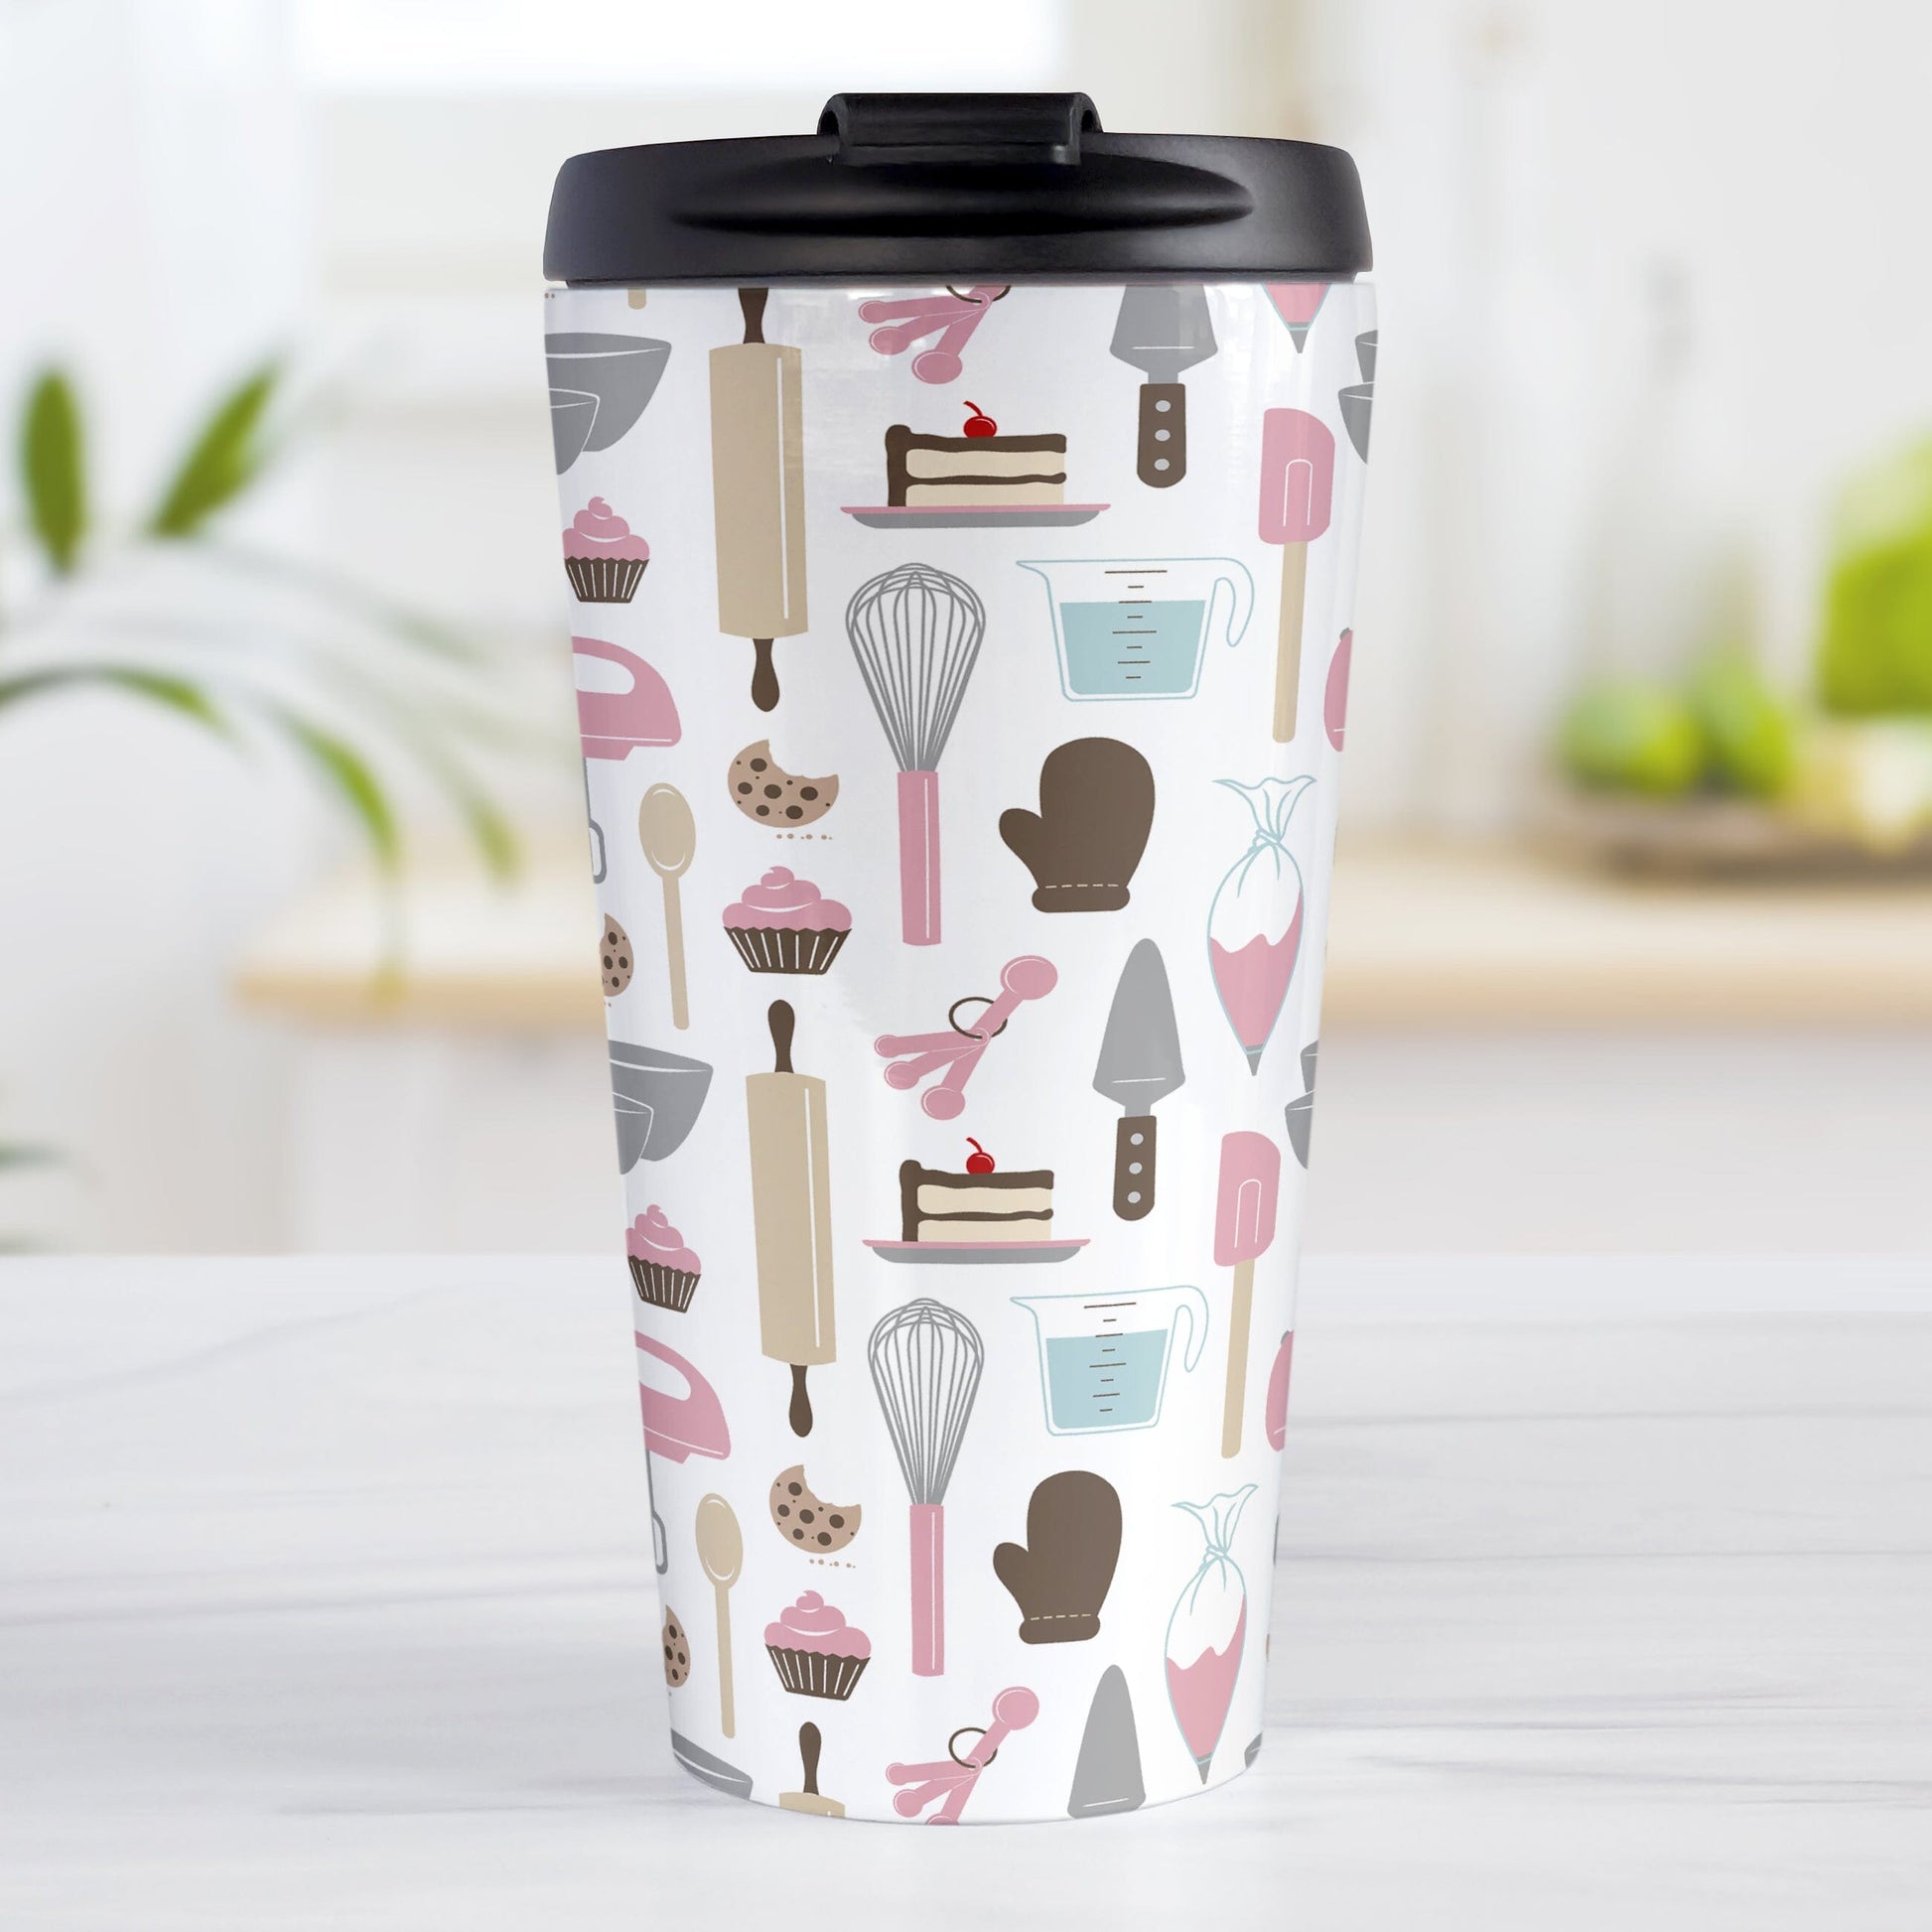 Pink Baking Pattern Travel Mug (15oz) at Amy's Coffee Mugs. A stainless steel travel mug designed with a pattern of baking tools like spatulas, whisks, mixers, bowls, and spoons, with cookies, cupcakes, and cake all in a pink, gray, brown, and beige color scheme that wraps around the travel mug. 